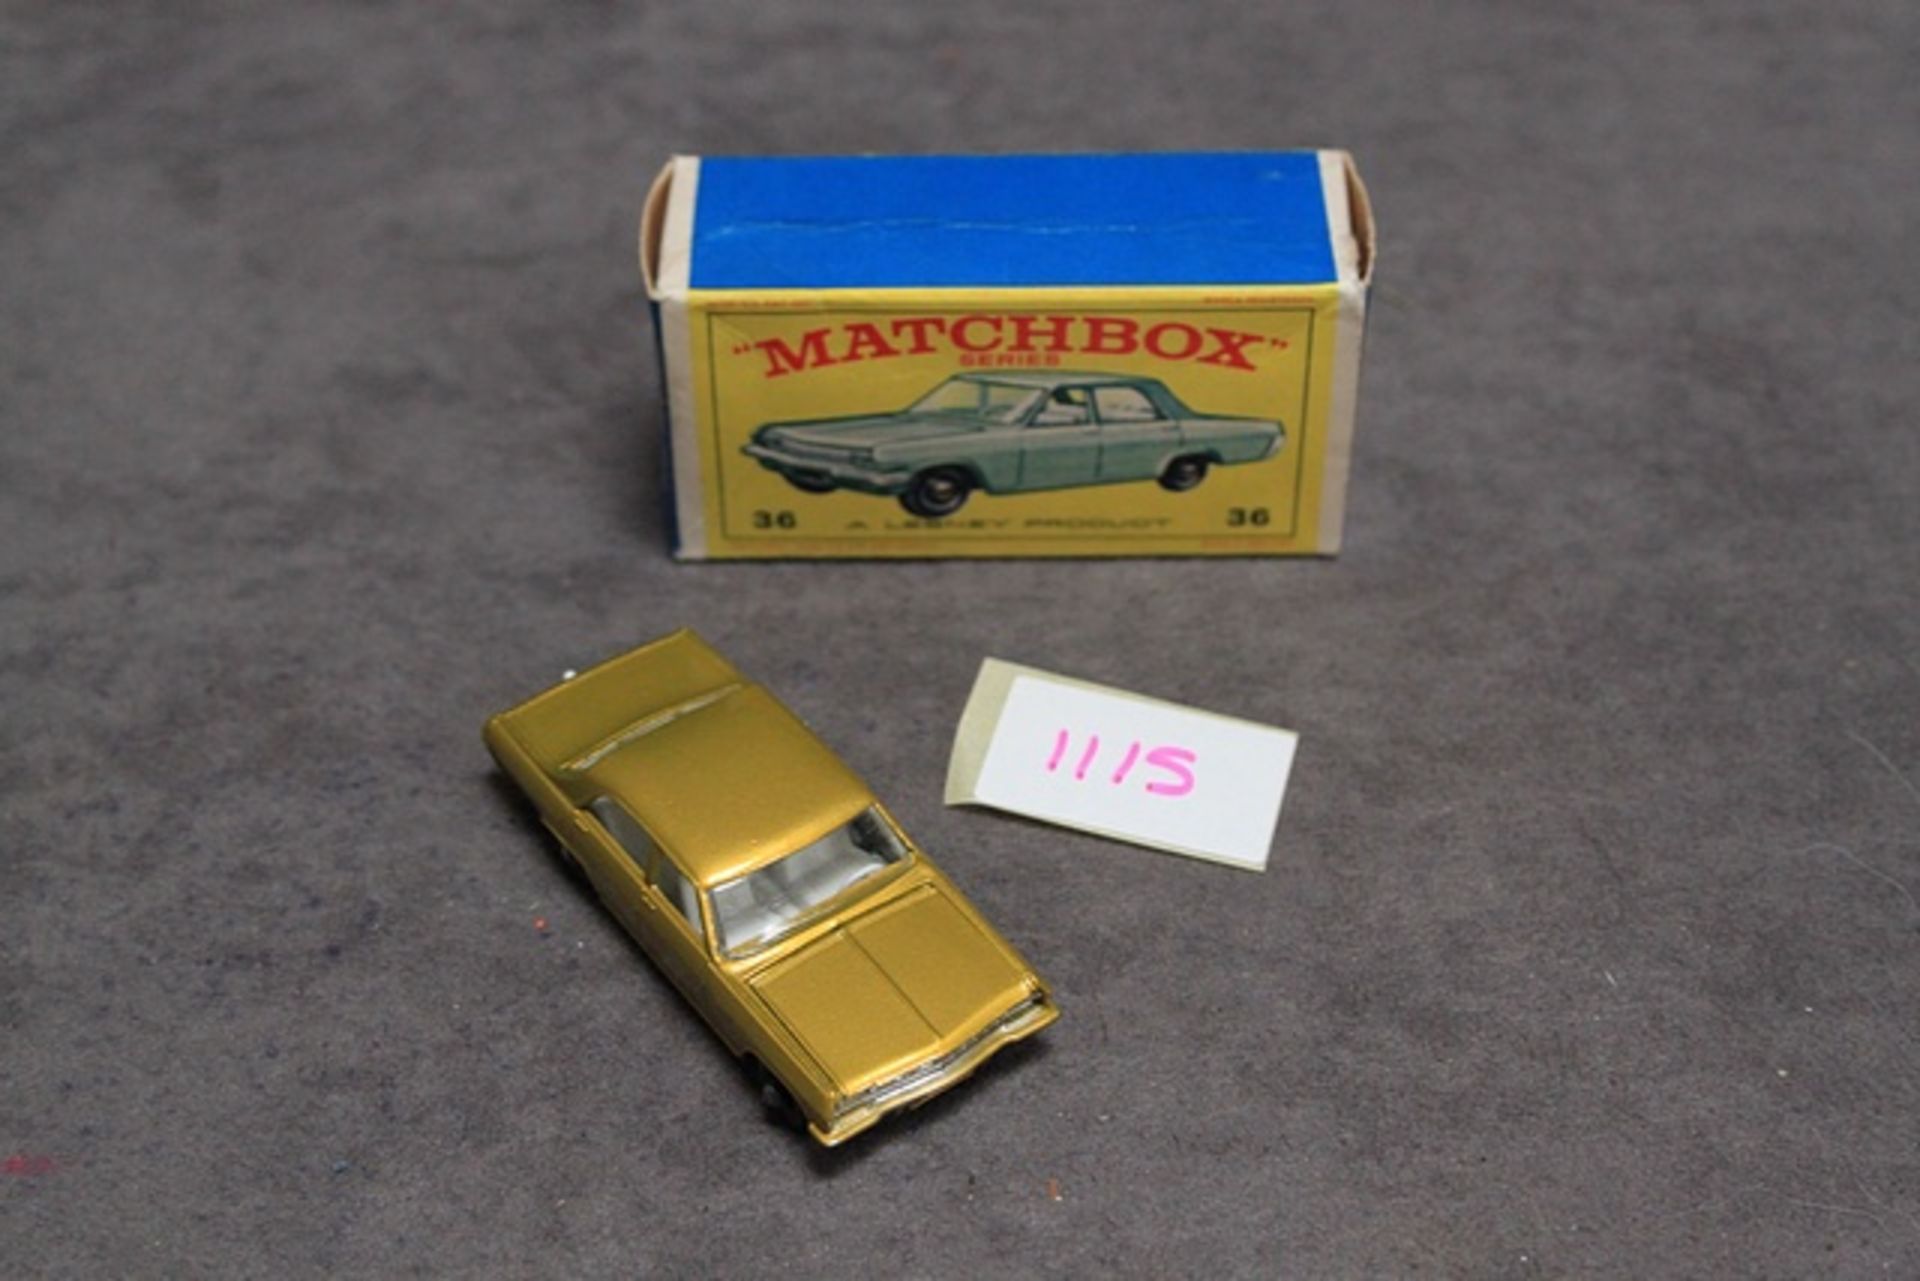 Mint Matchbox Series diecast #36 Opel Diplomat in gold in firm excellent rarer box - Image 2 of 3